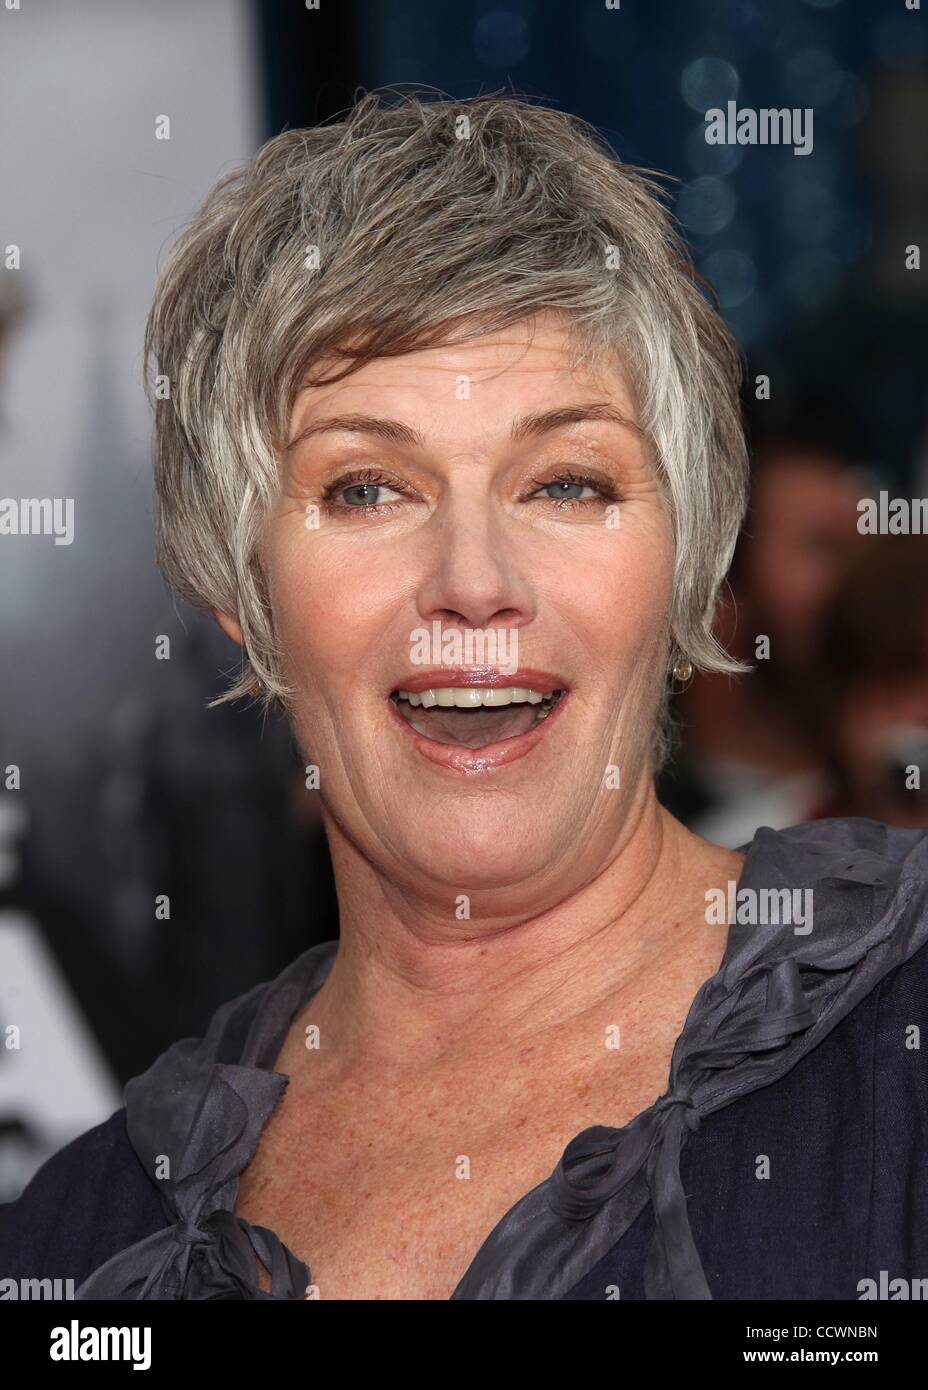 May 17, 2010 - Hollywood, California, USA - Actor KELLY MCGILLIS arriving to the 'Prince of Persia The Sands of Time' Hollywood Premiere held at Mann's Chinese Theatre. (Credit Image: © Lisa O'Connor/ZUMA Press) Stock Photo